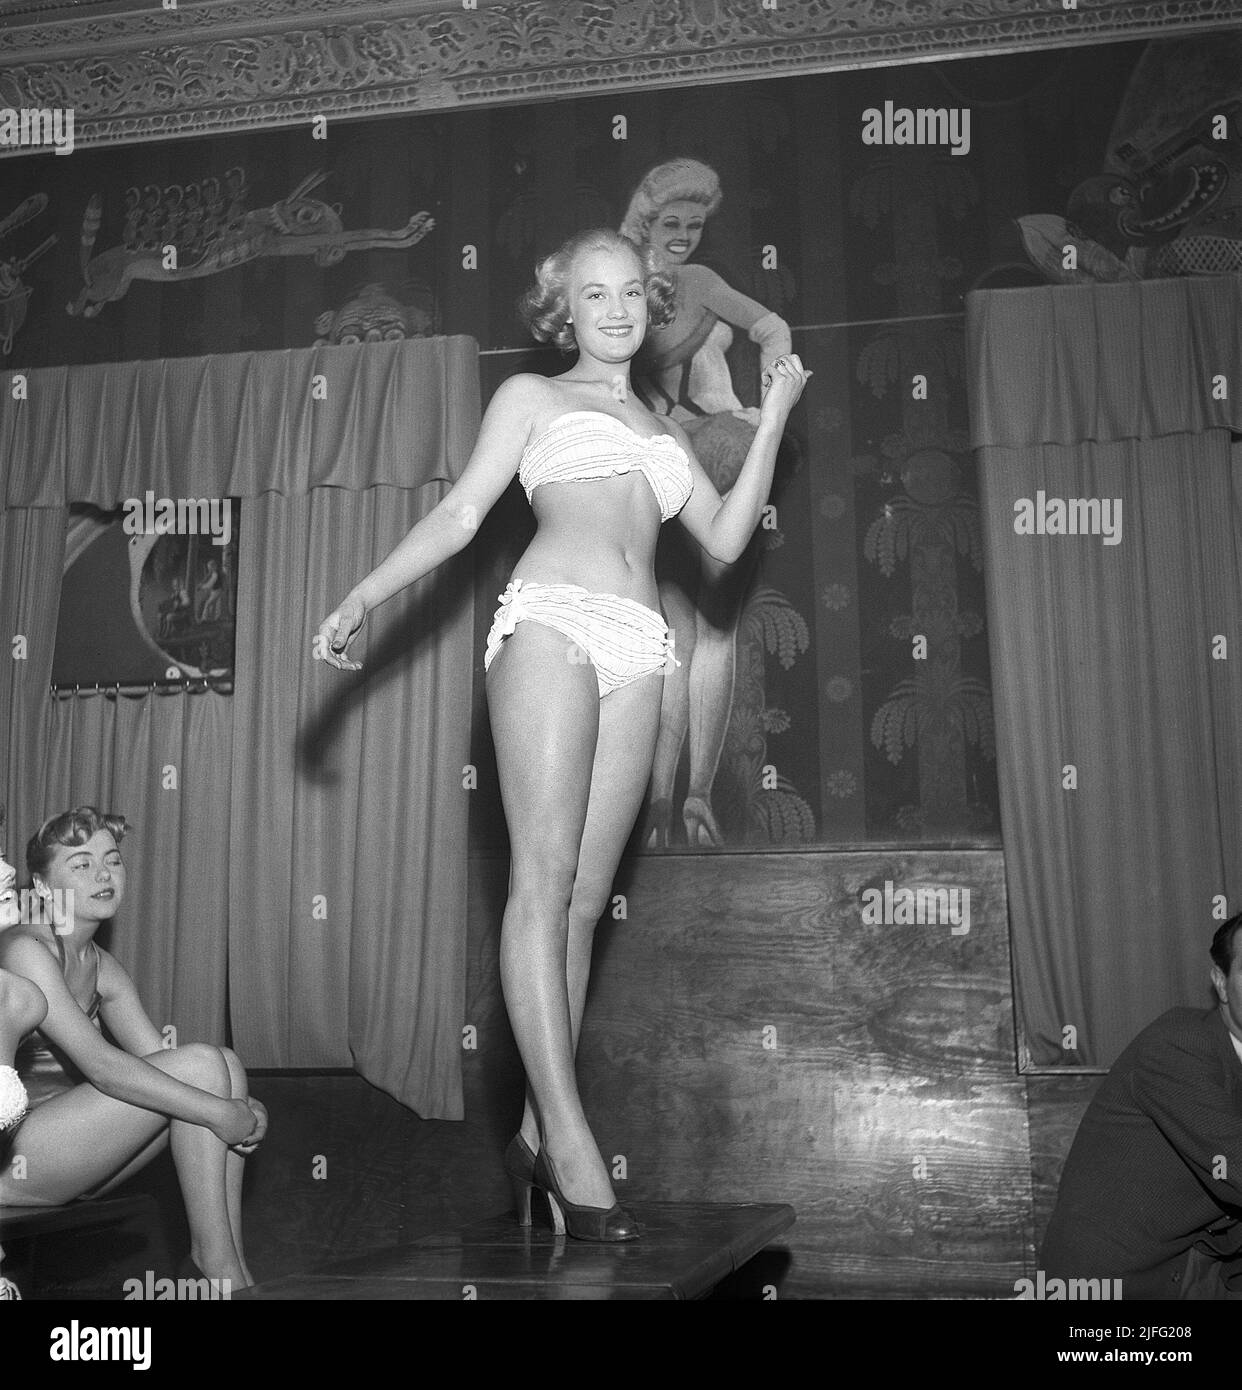 Woman of the 1950s. One of the contestants in the beauty contest is Monika Larsson and she is pictured in her bikini during the contest. On the wall behind her is a painting of the american actress Betty Grable, probably the most famous female moviestar during the time of WWII. She was the most popular pin-up girl.  Sweden 1953. Kristoffersson ref BL33-5 Stock Photo